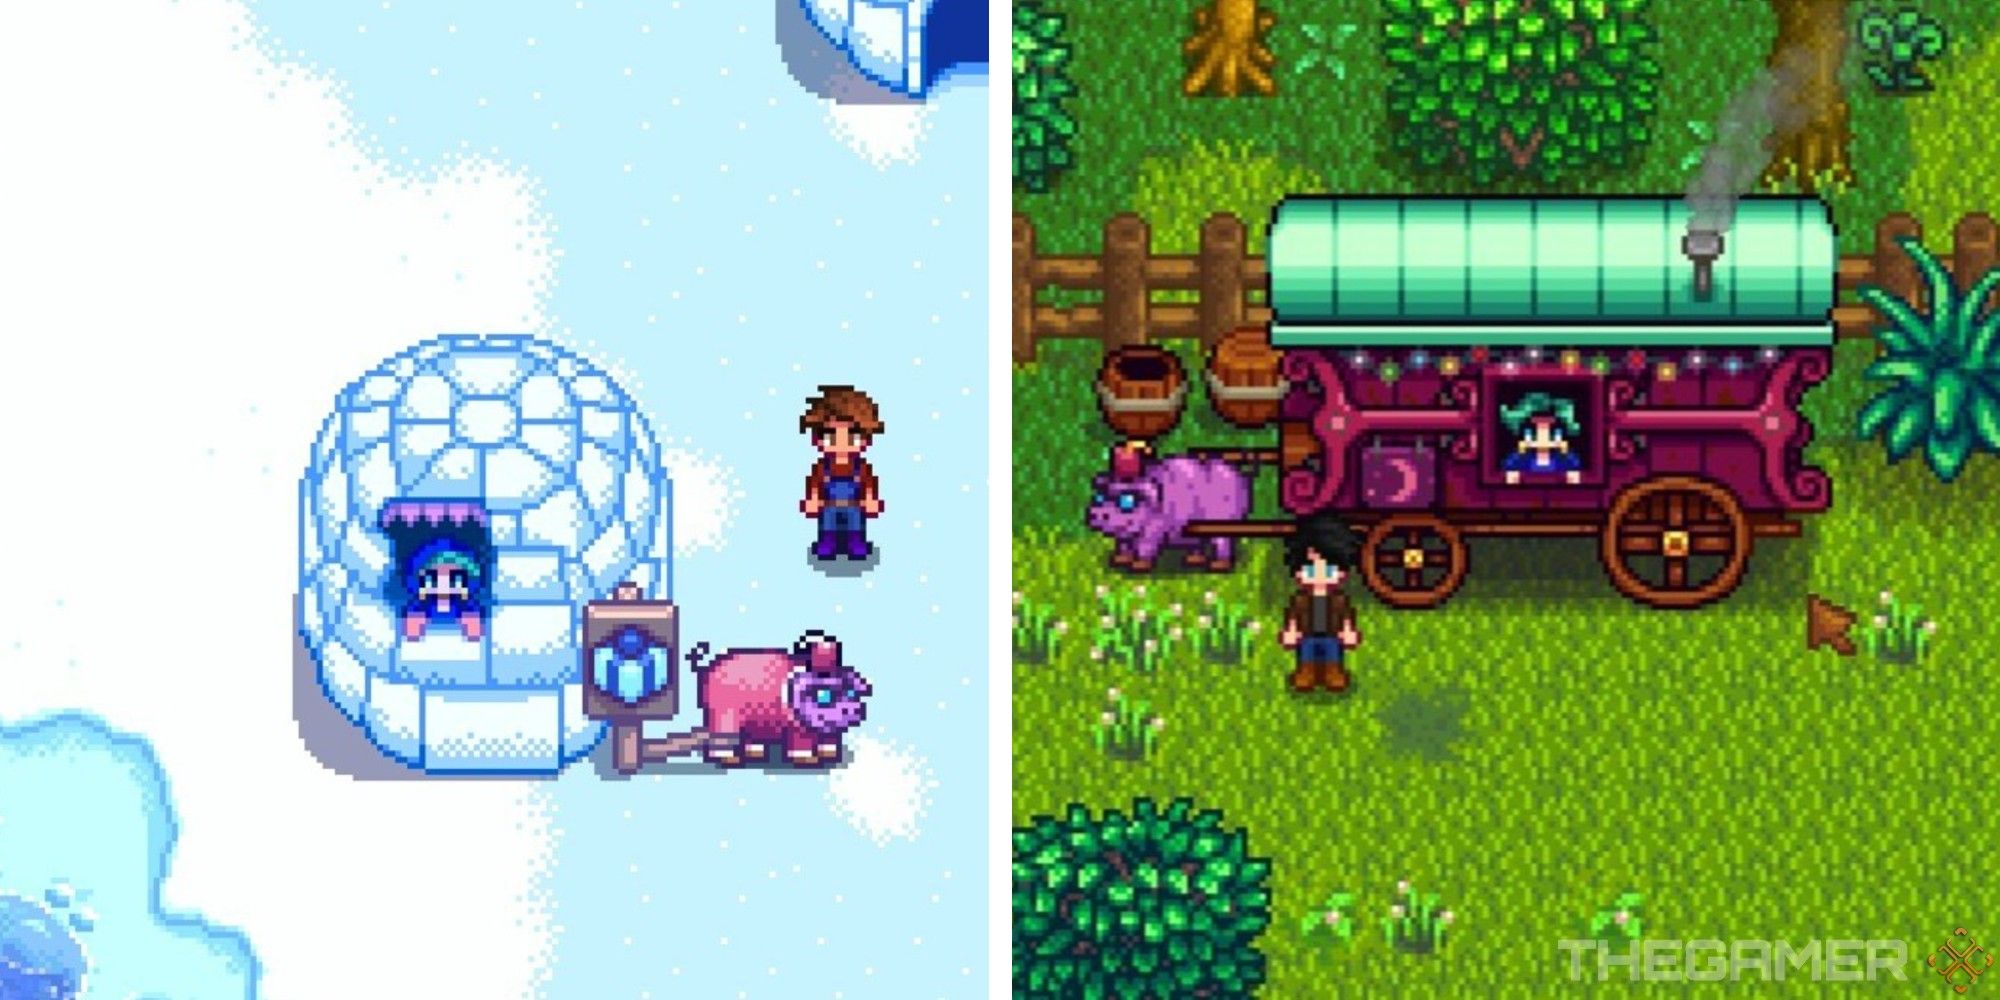 traveling merchant at festival of ice, next to image of merchant in her usual spot